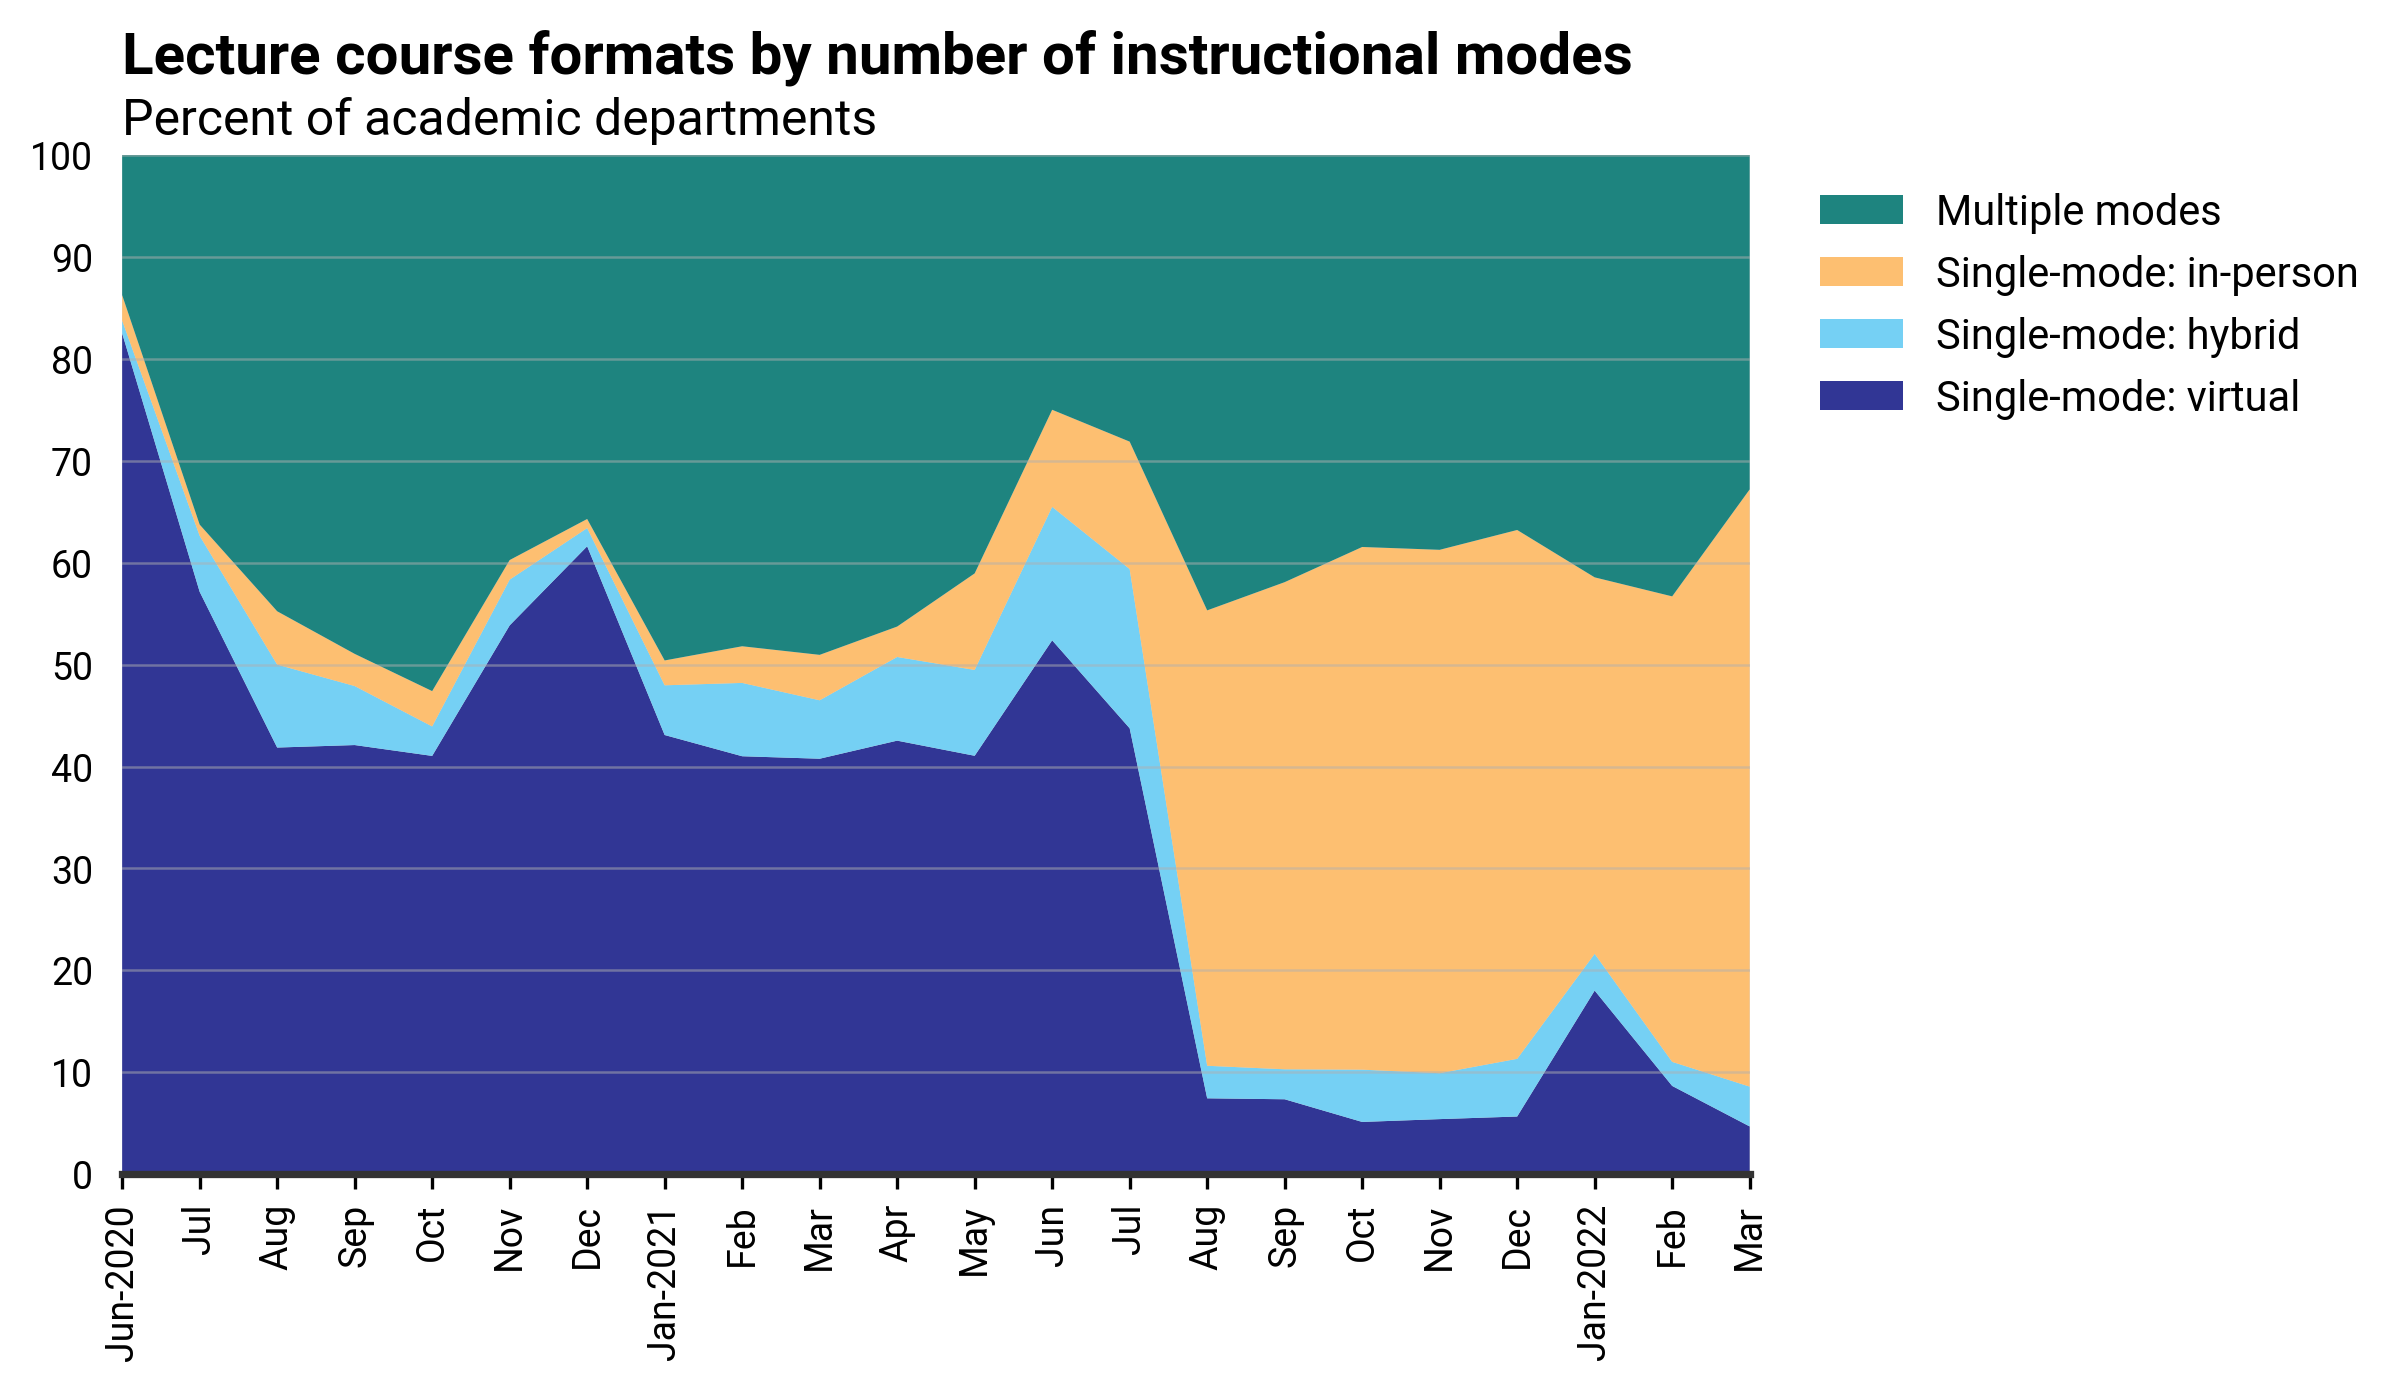 DB_2022-004 chart 02: Lecture course formats by number of instructional modes (Credit: AGI; data from AGI's Geoscience COVID-19 Survey)